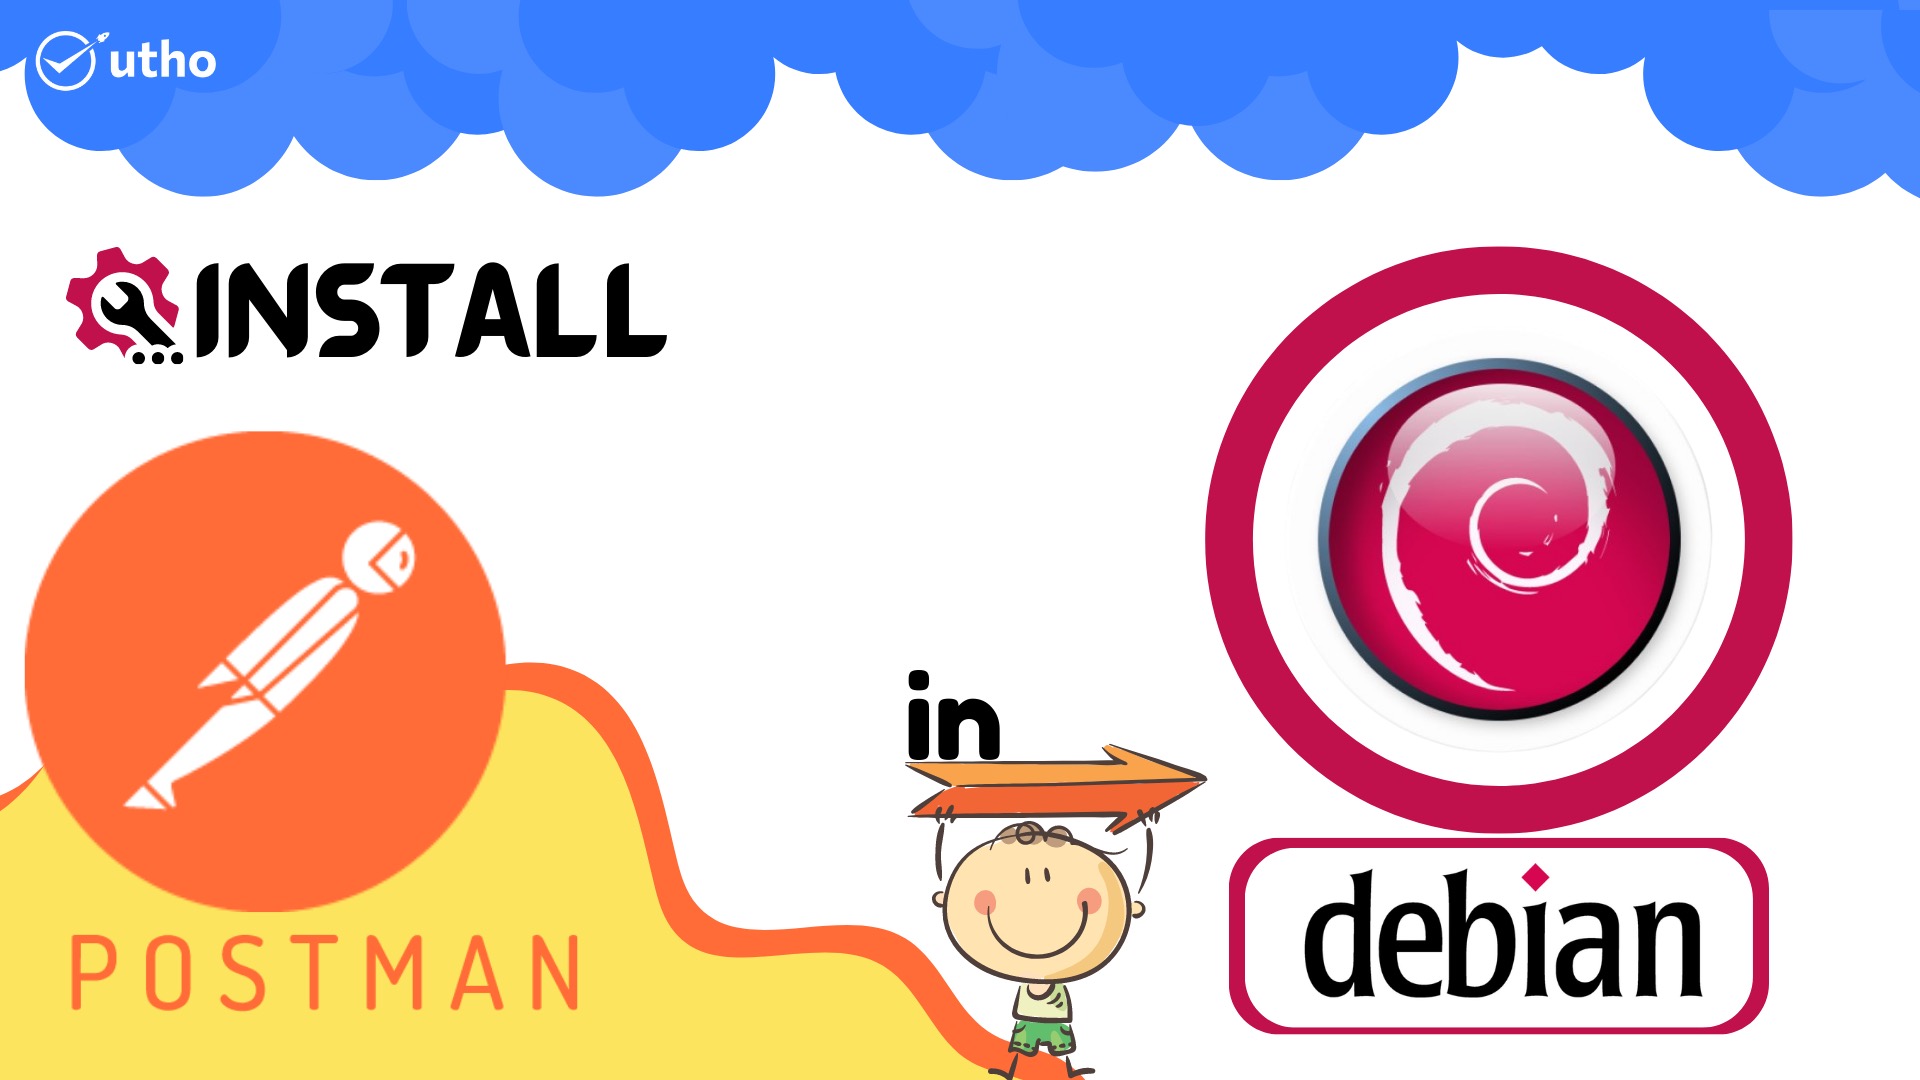 How to install Postman on Debian